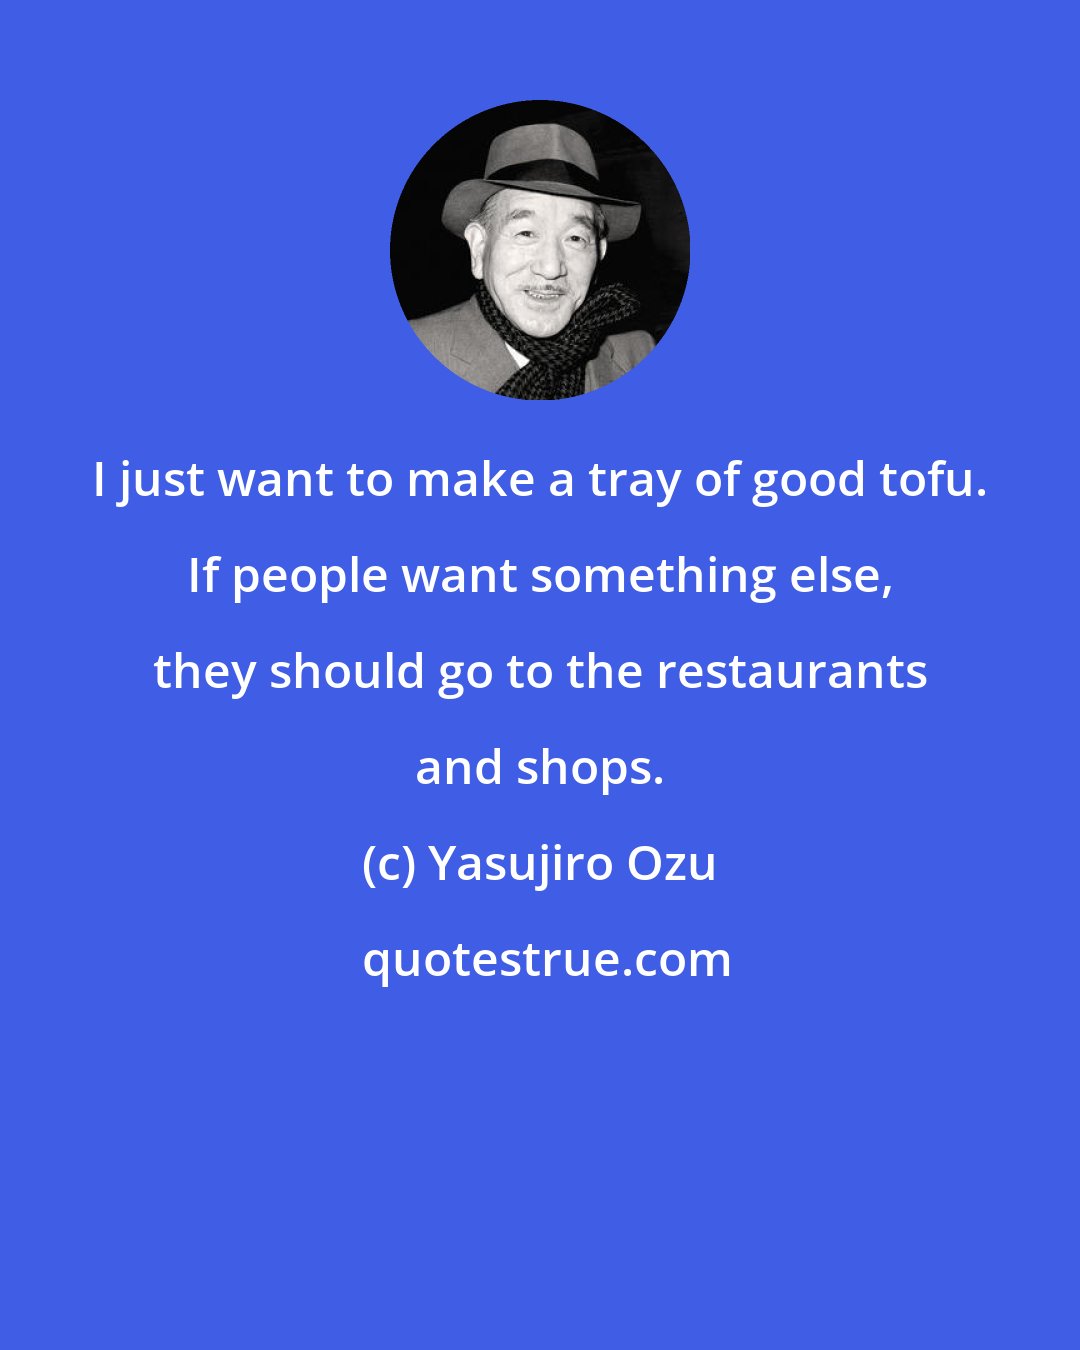 Yasujiro Ozu: I just want to make a tray of good tofu. If people want something else, they should go to the restaurants and shops.